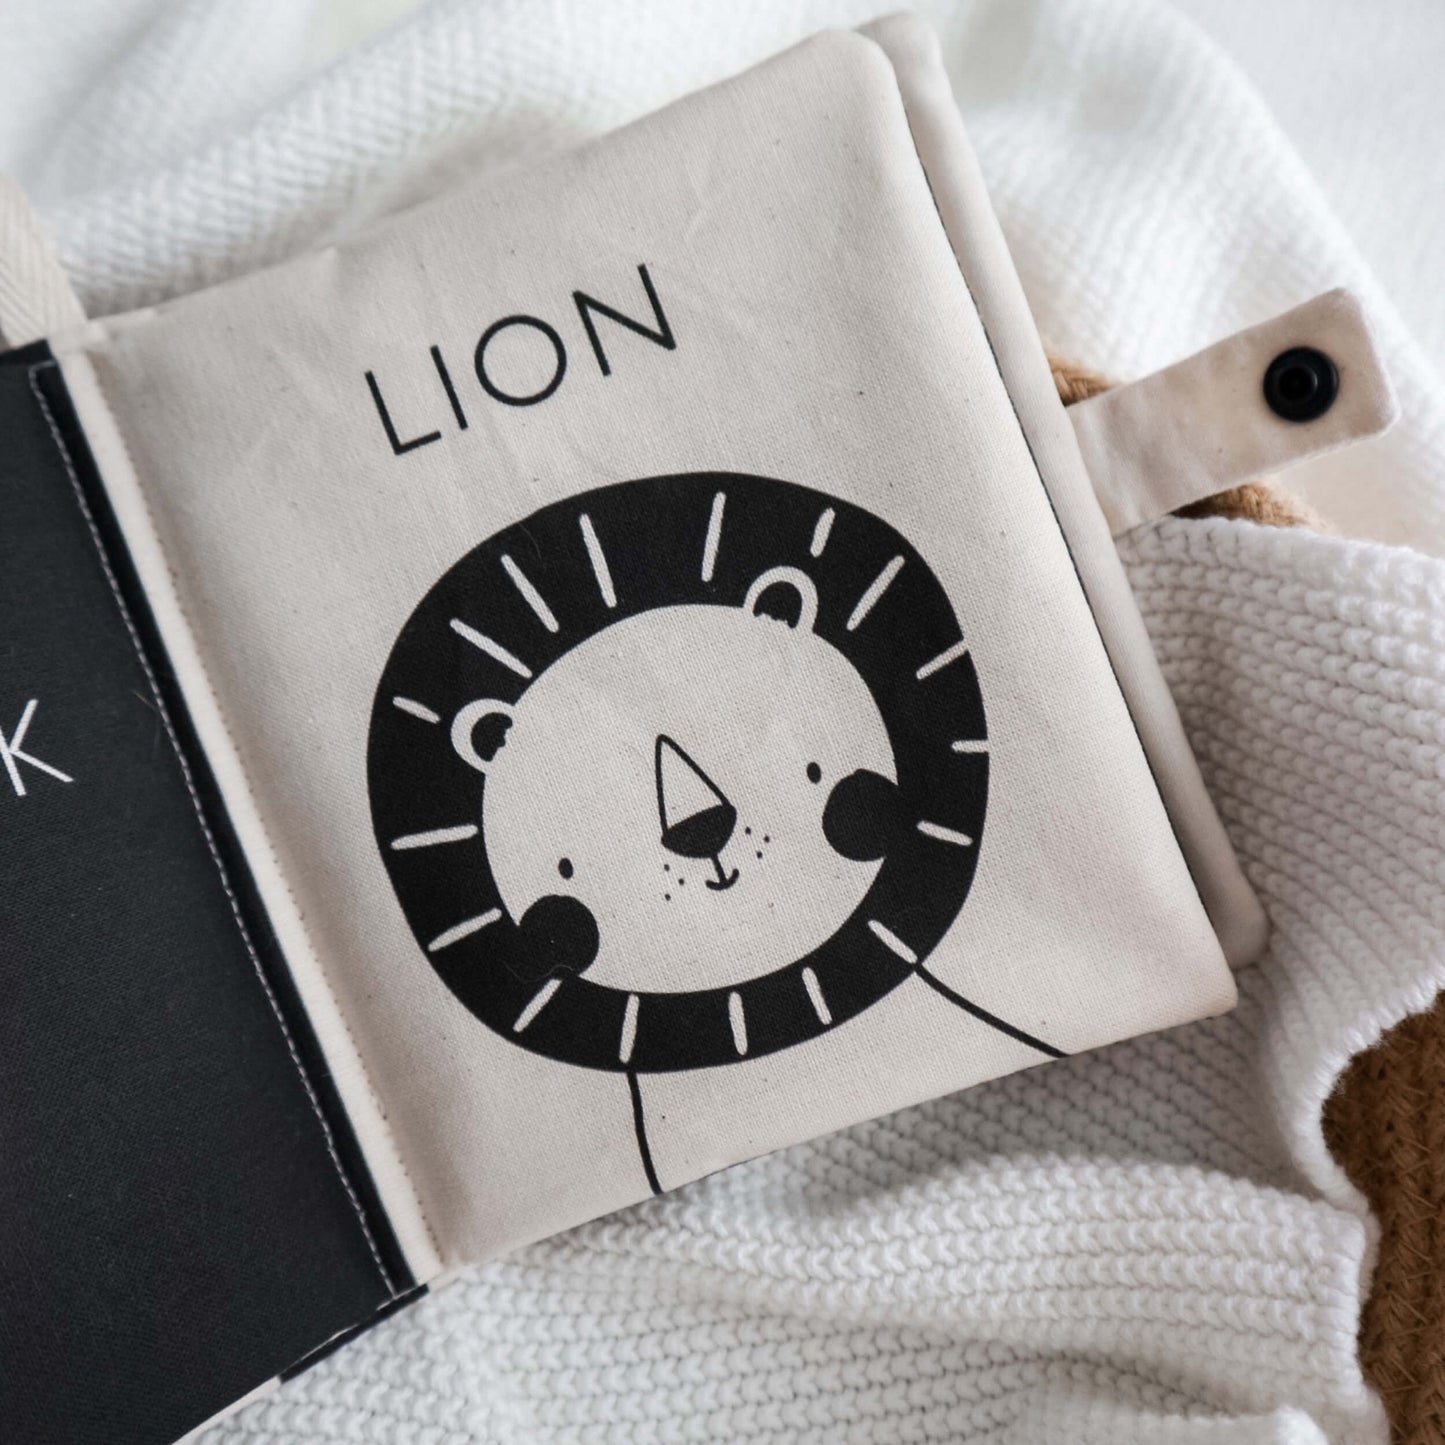 Personalised first animals soft crinkle baby book